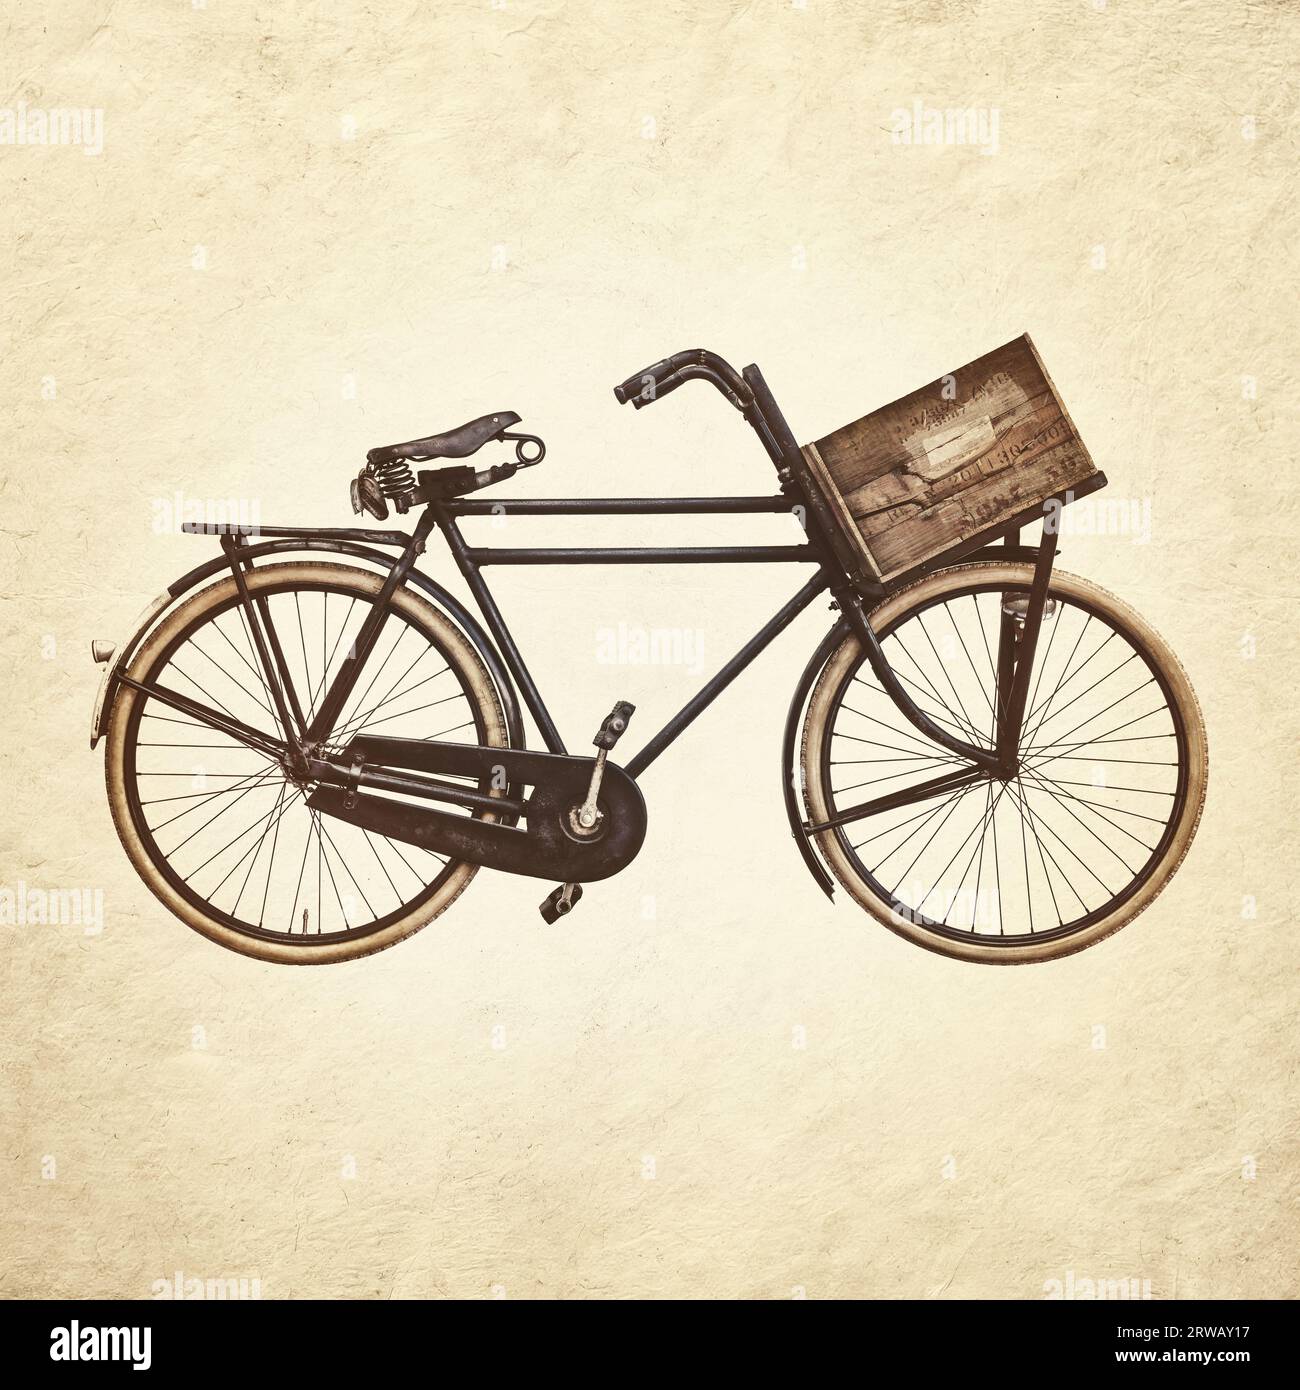 Sepia toned image of a vintage black cargo bicycle with old wooden transport crate Stock Photo